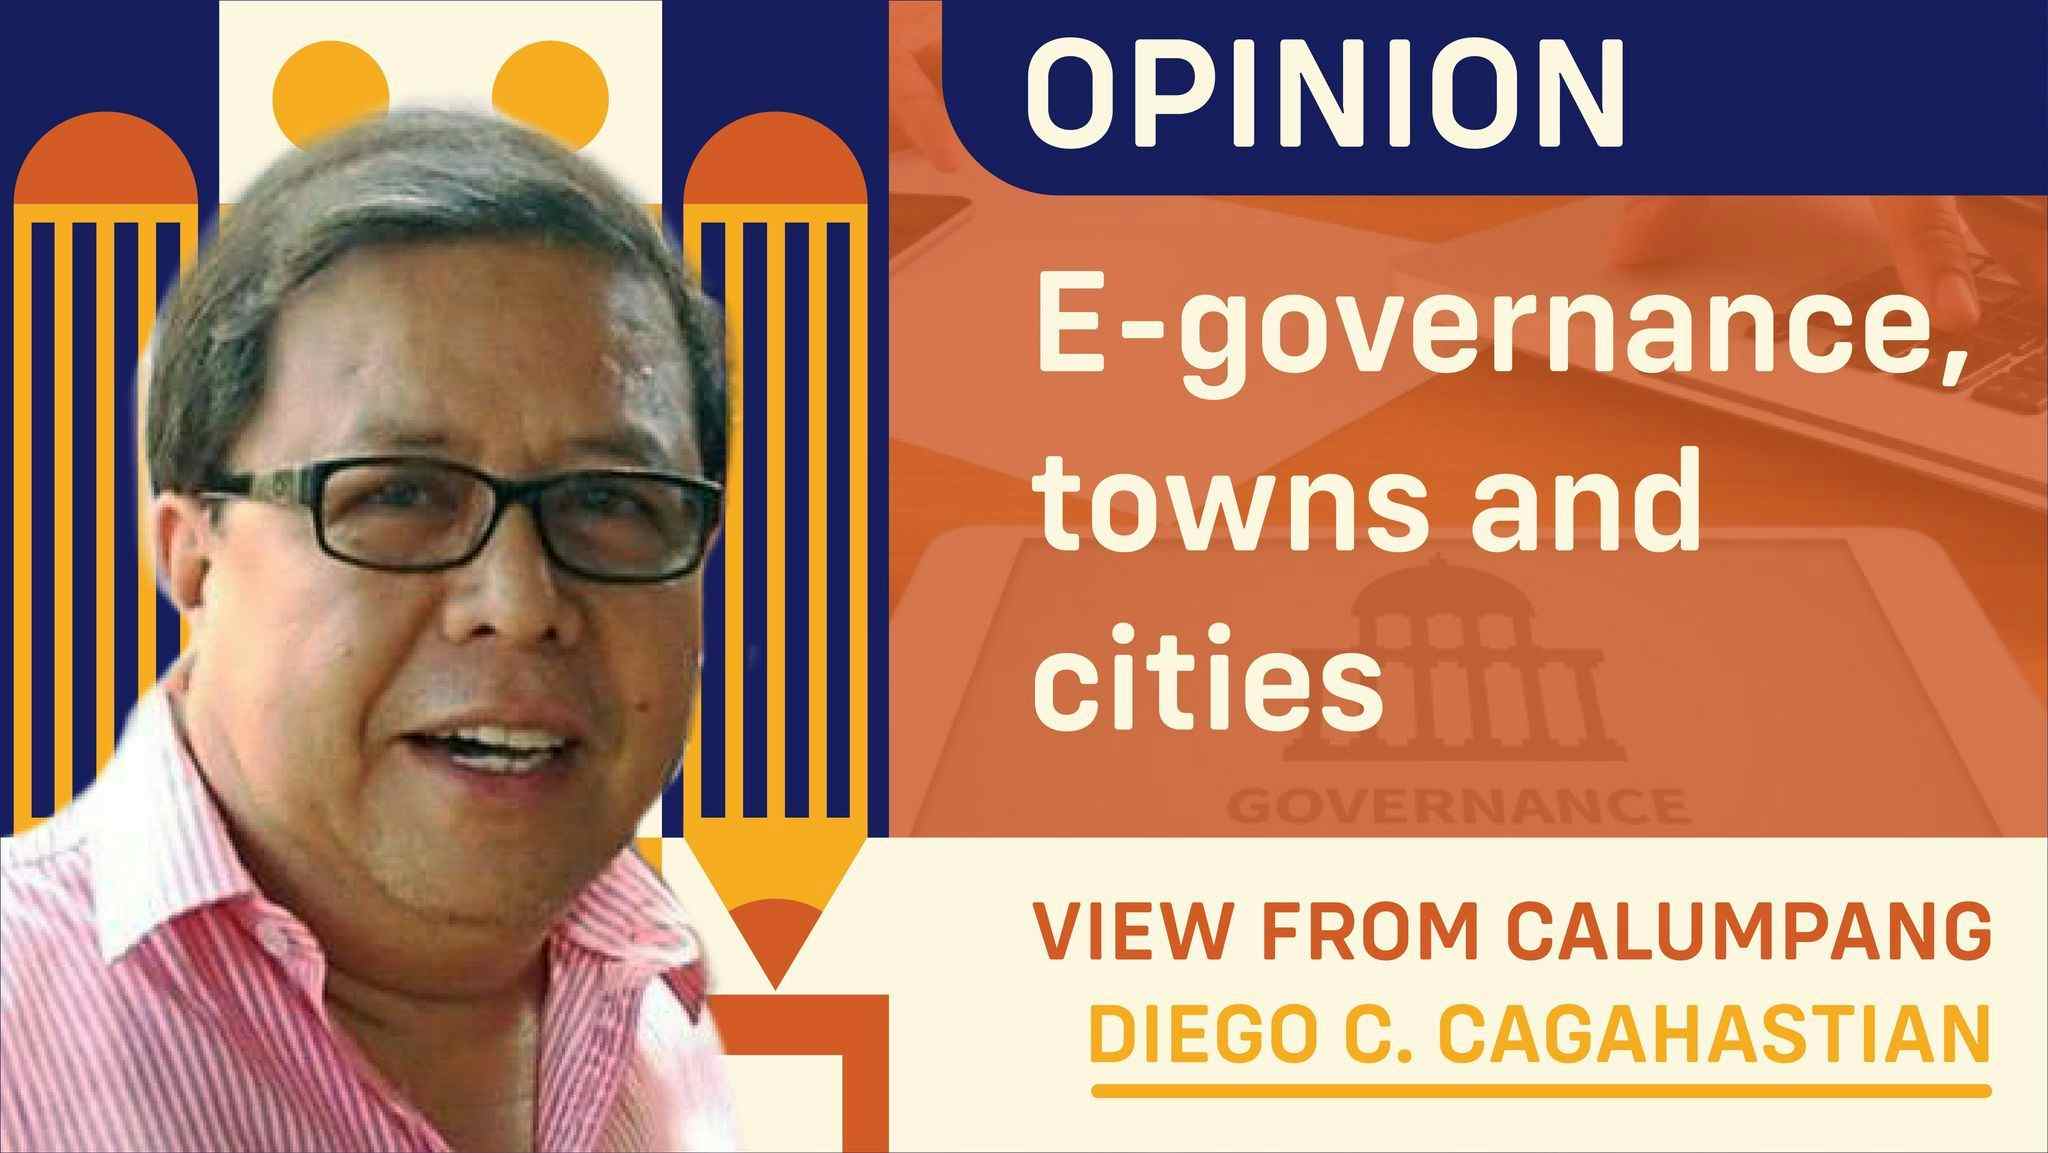 E-governance, towns and cities